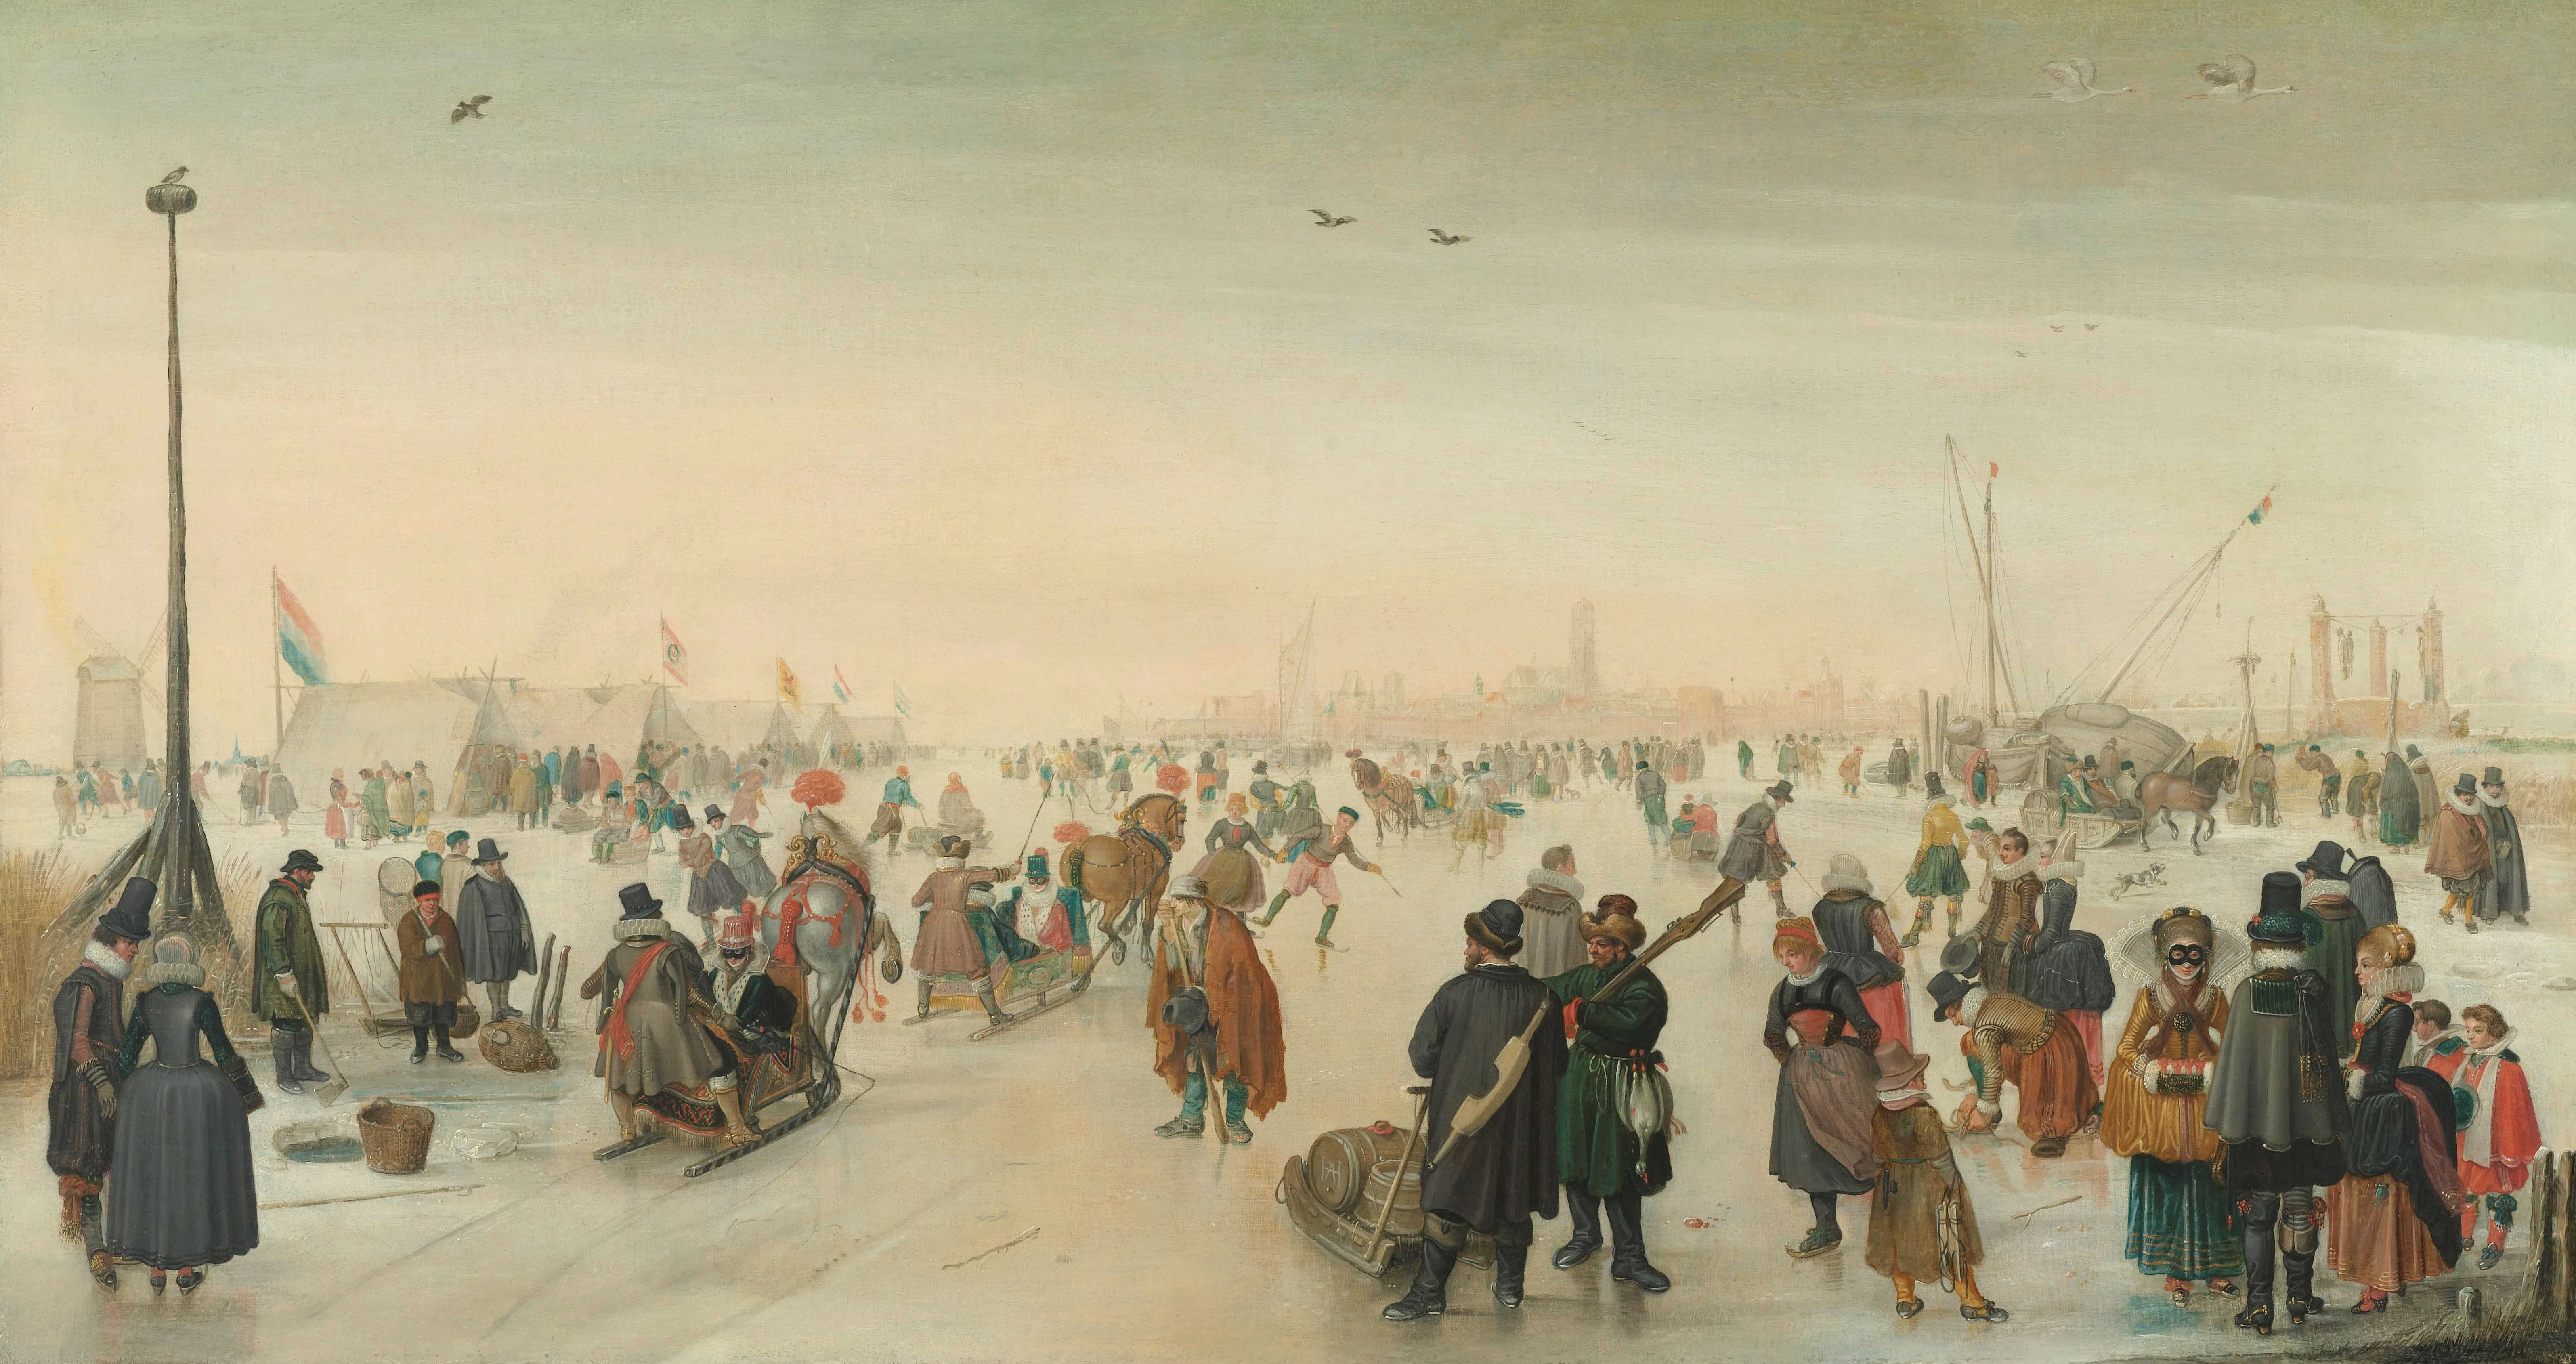 Find out more about Hendrick Avercamp - Enjoying the Ice near a Town